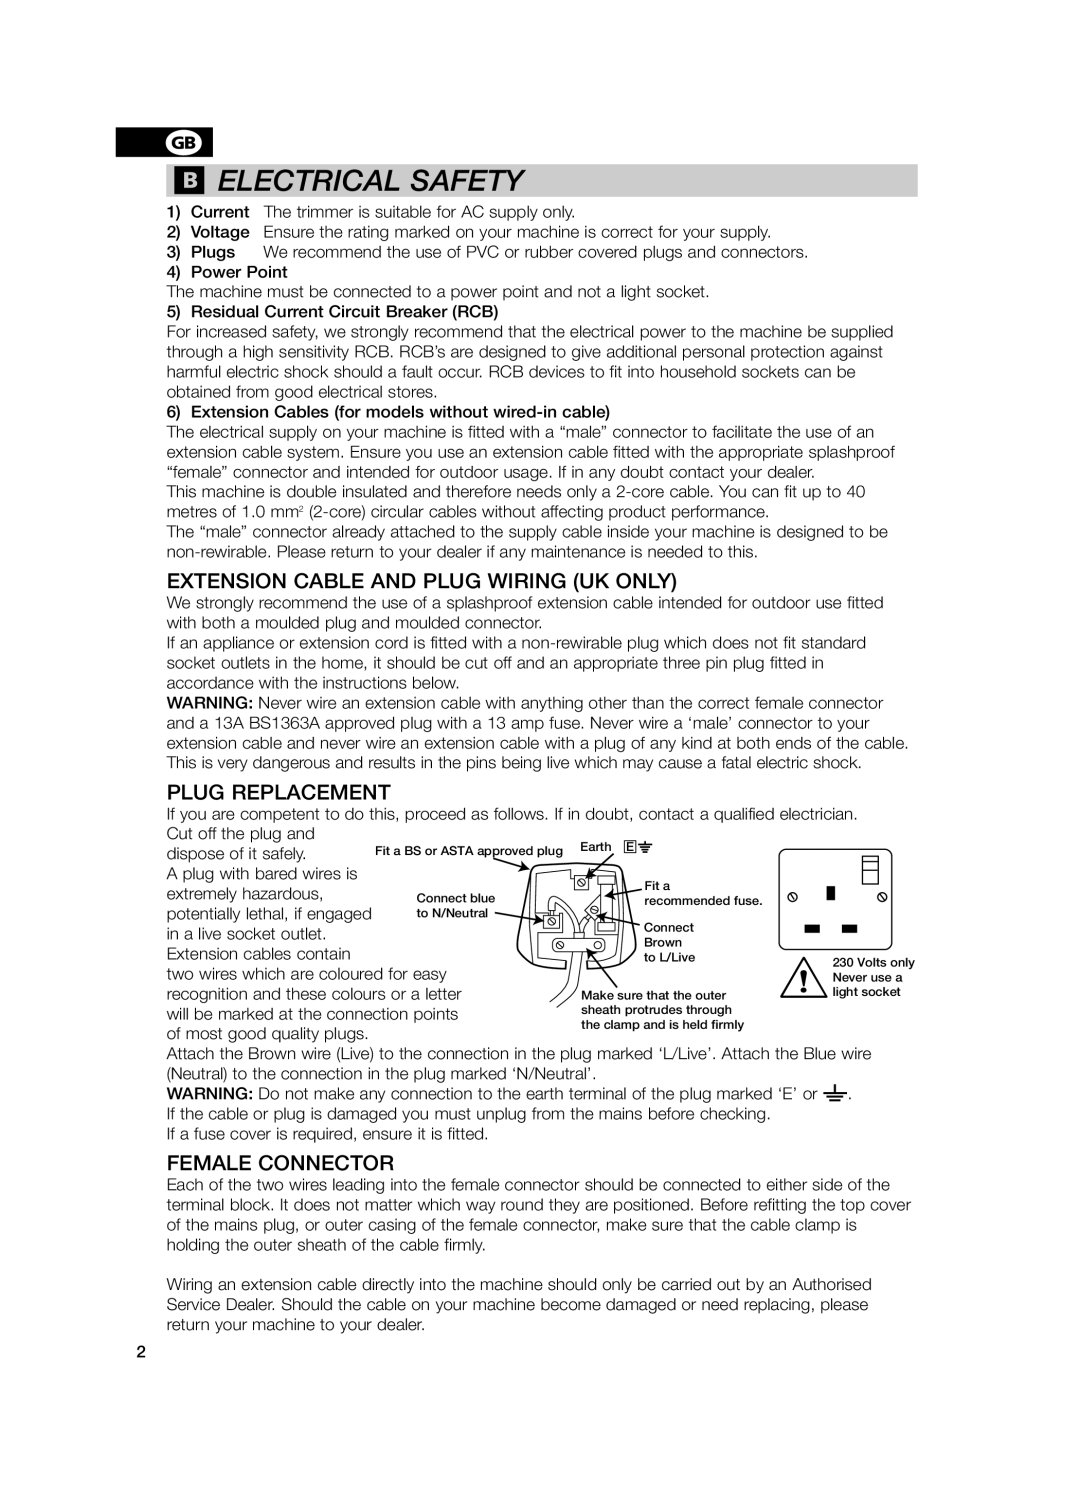 Flymo PN 248722 manual Relectrical Safety 